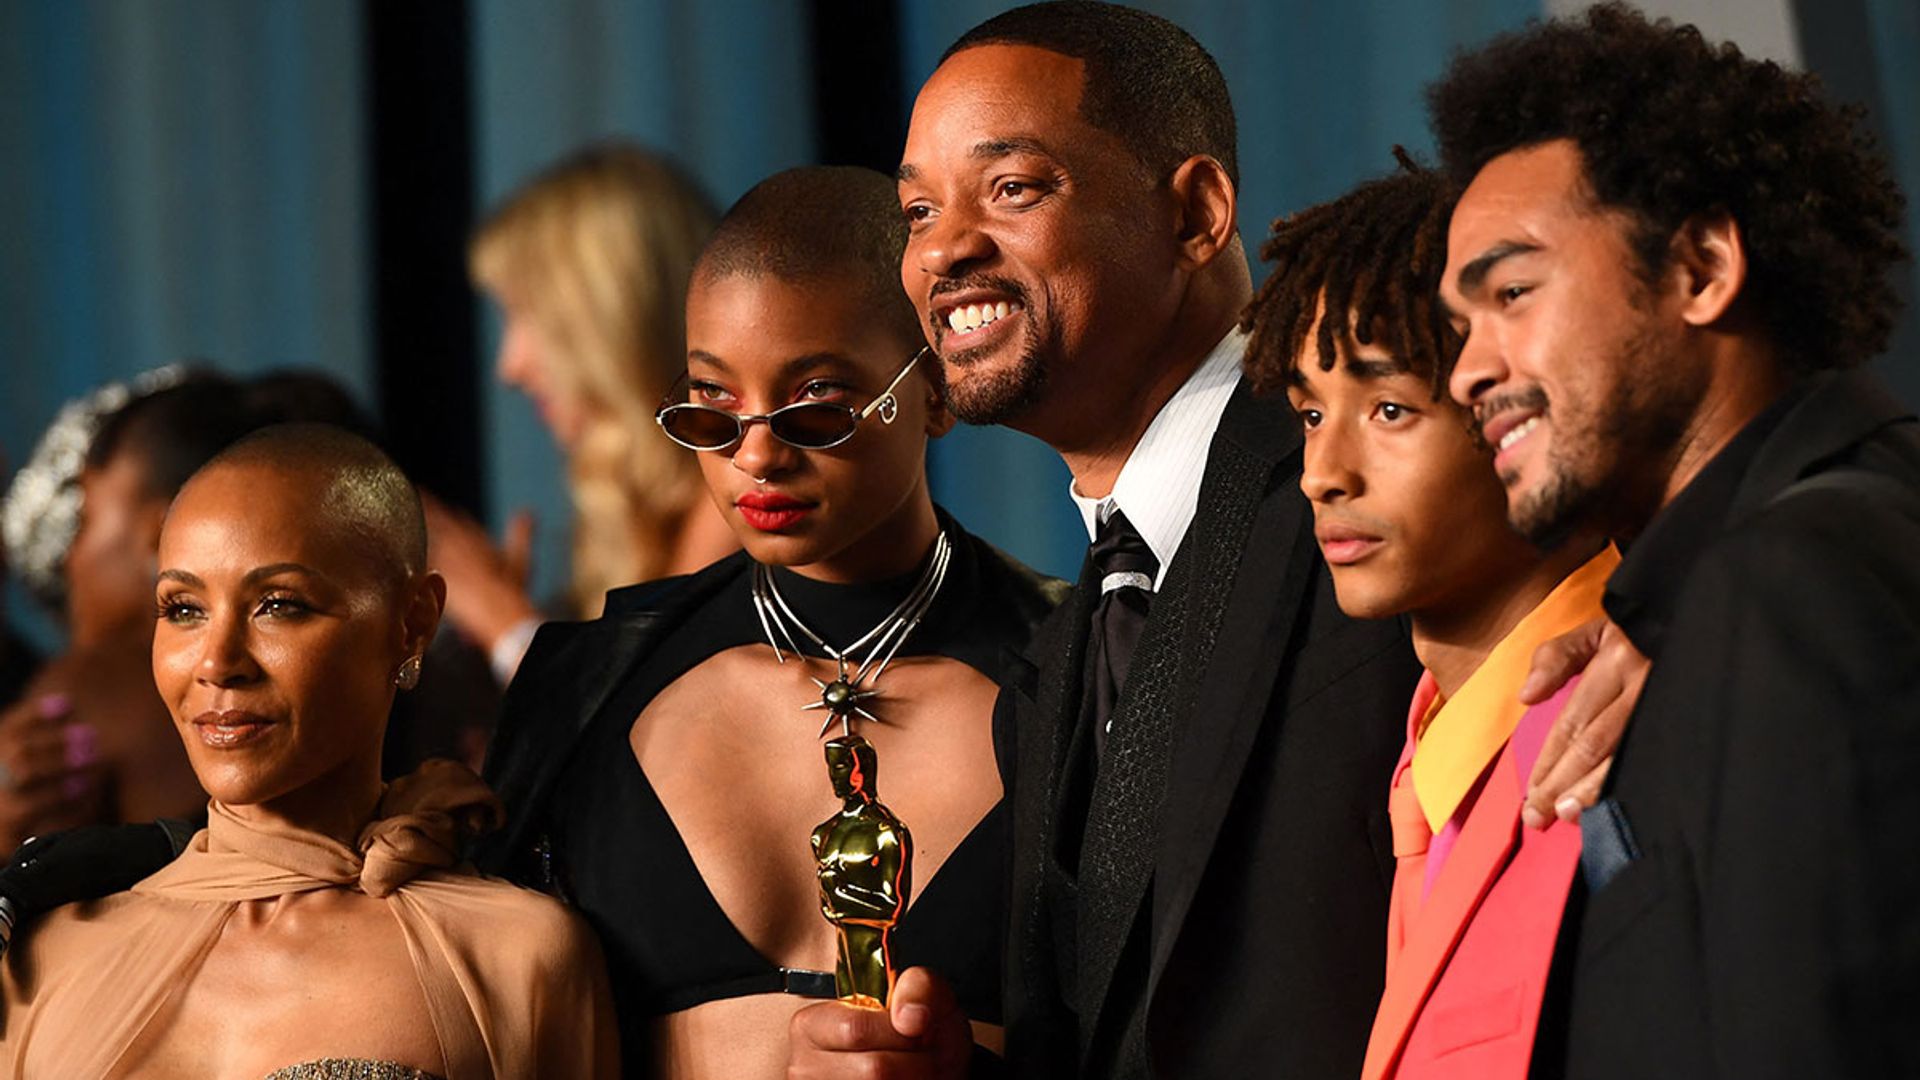 Will Smith is all smiles as he is supported by Jada Pinkett Smith and his kids at Oscars afterparty